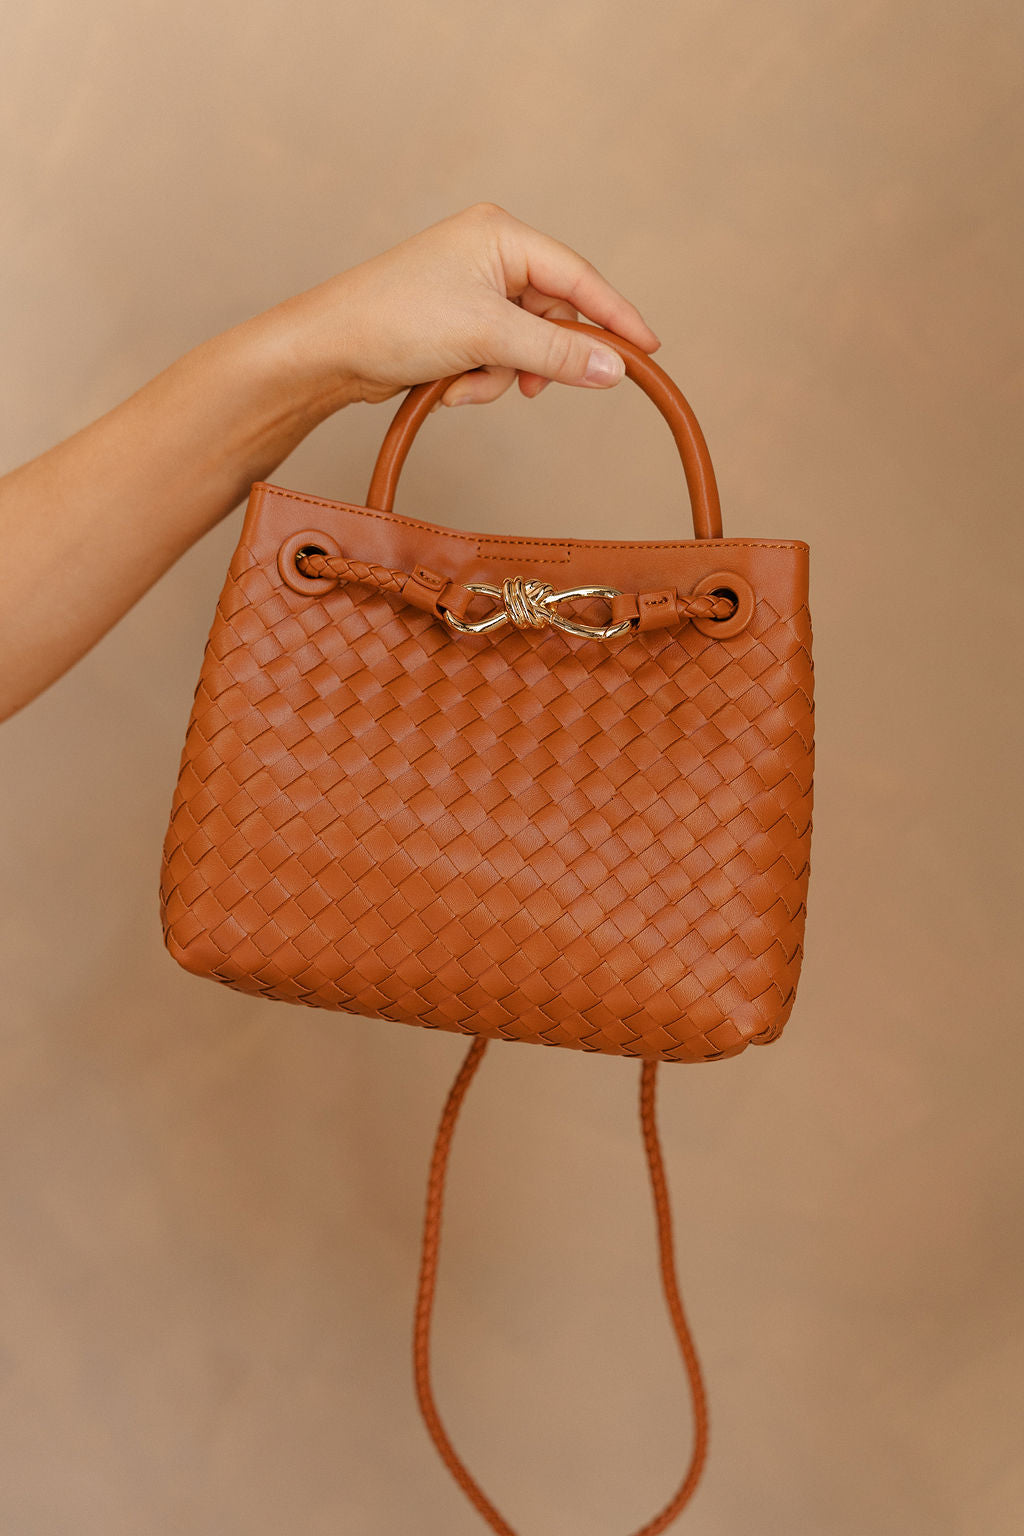 Model's hand is holding the Blakely Light Brown Braided Purse that has a brown woven body, small handle, cross body strap, and a front gold accent detail.